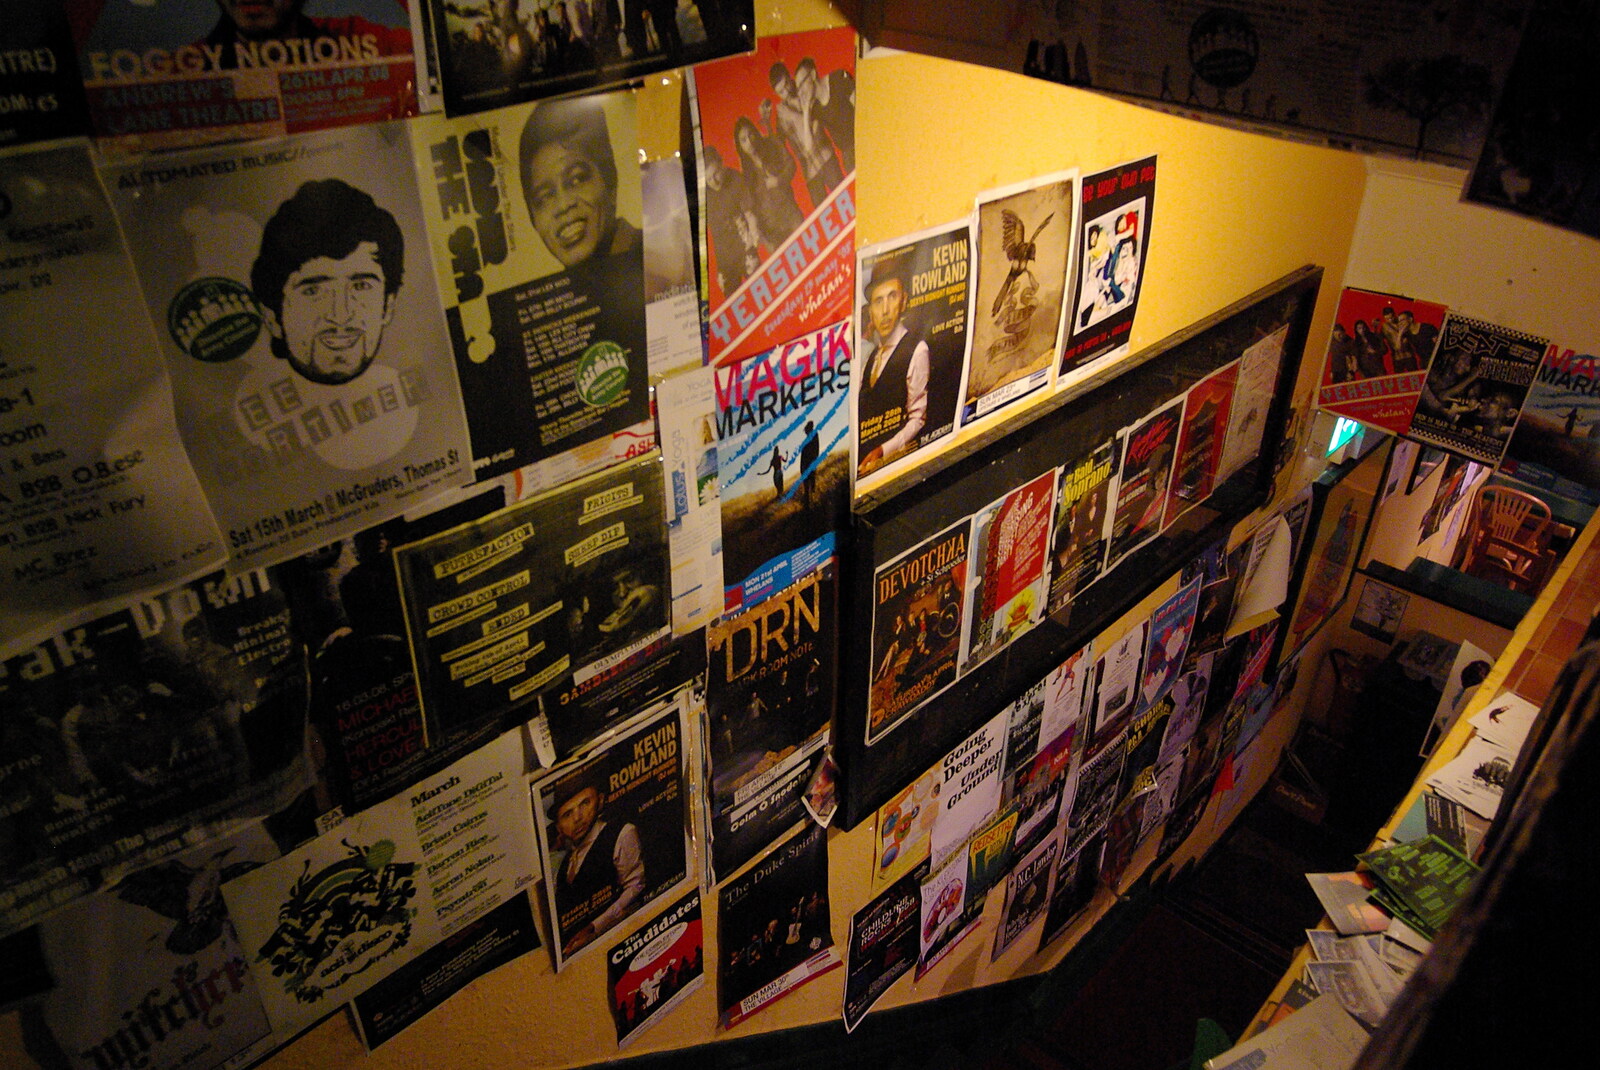 Easter in Dublin, Ireland - 21st March 2008: Music posters on the steps of Simon's Café